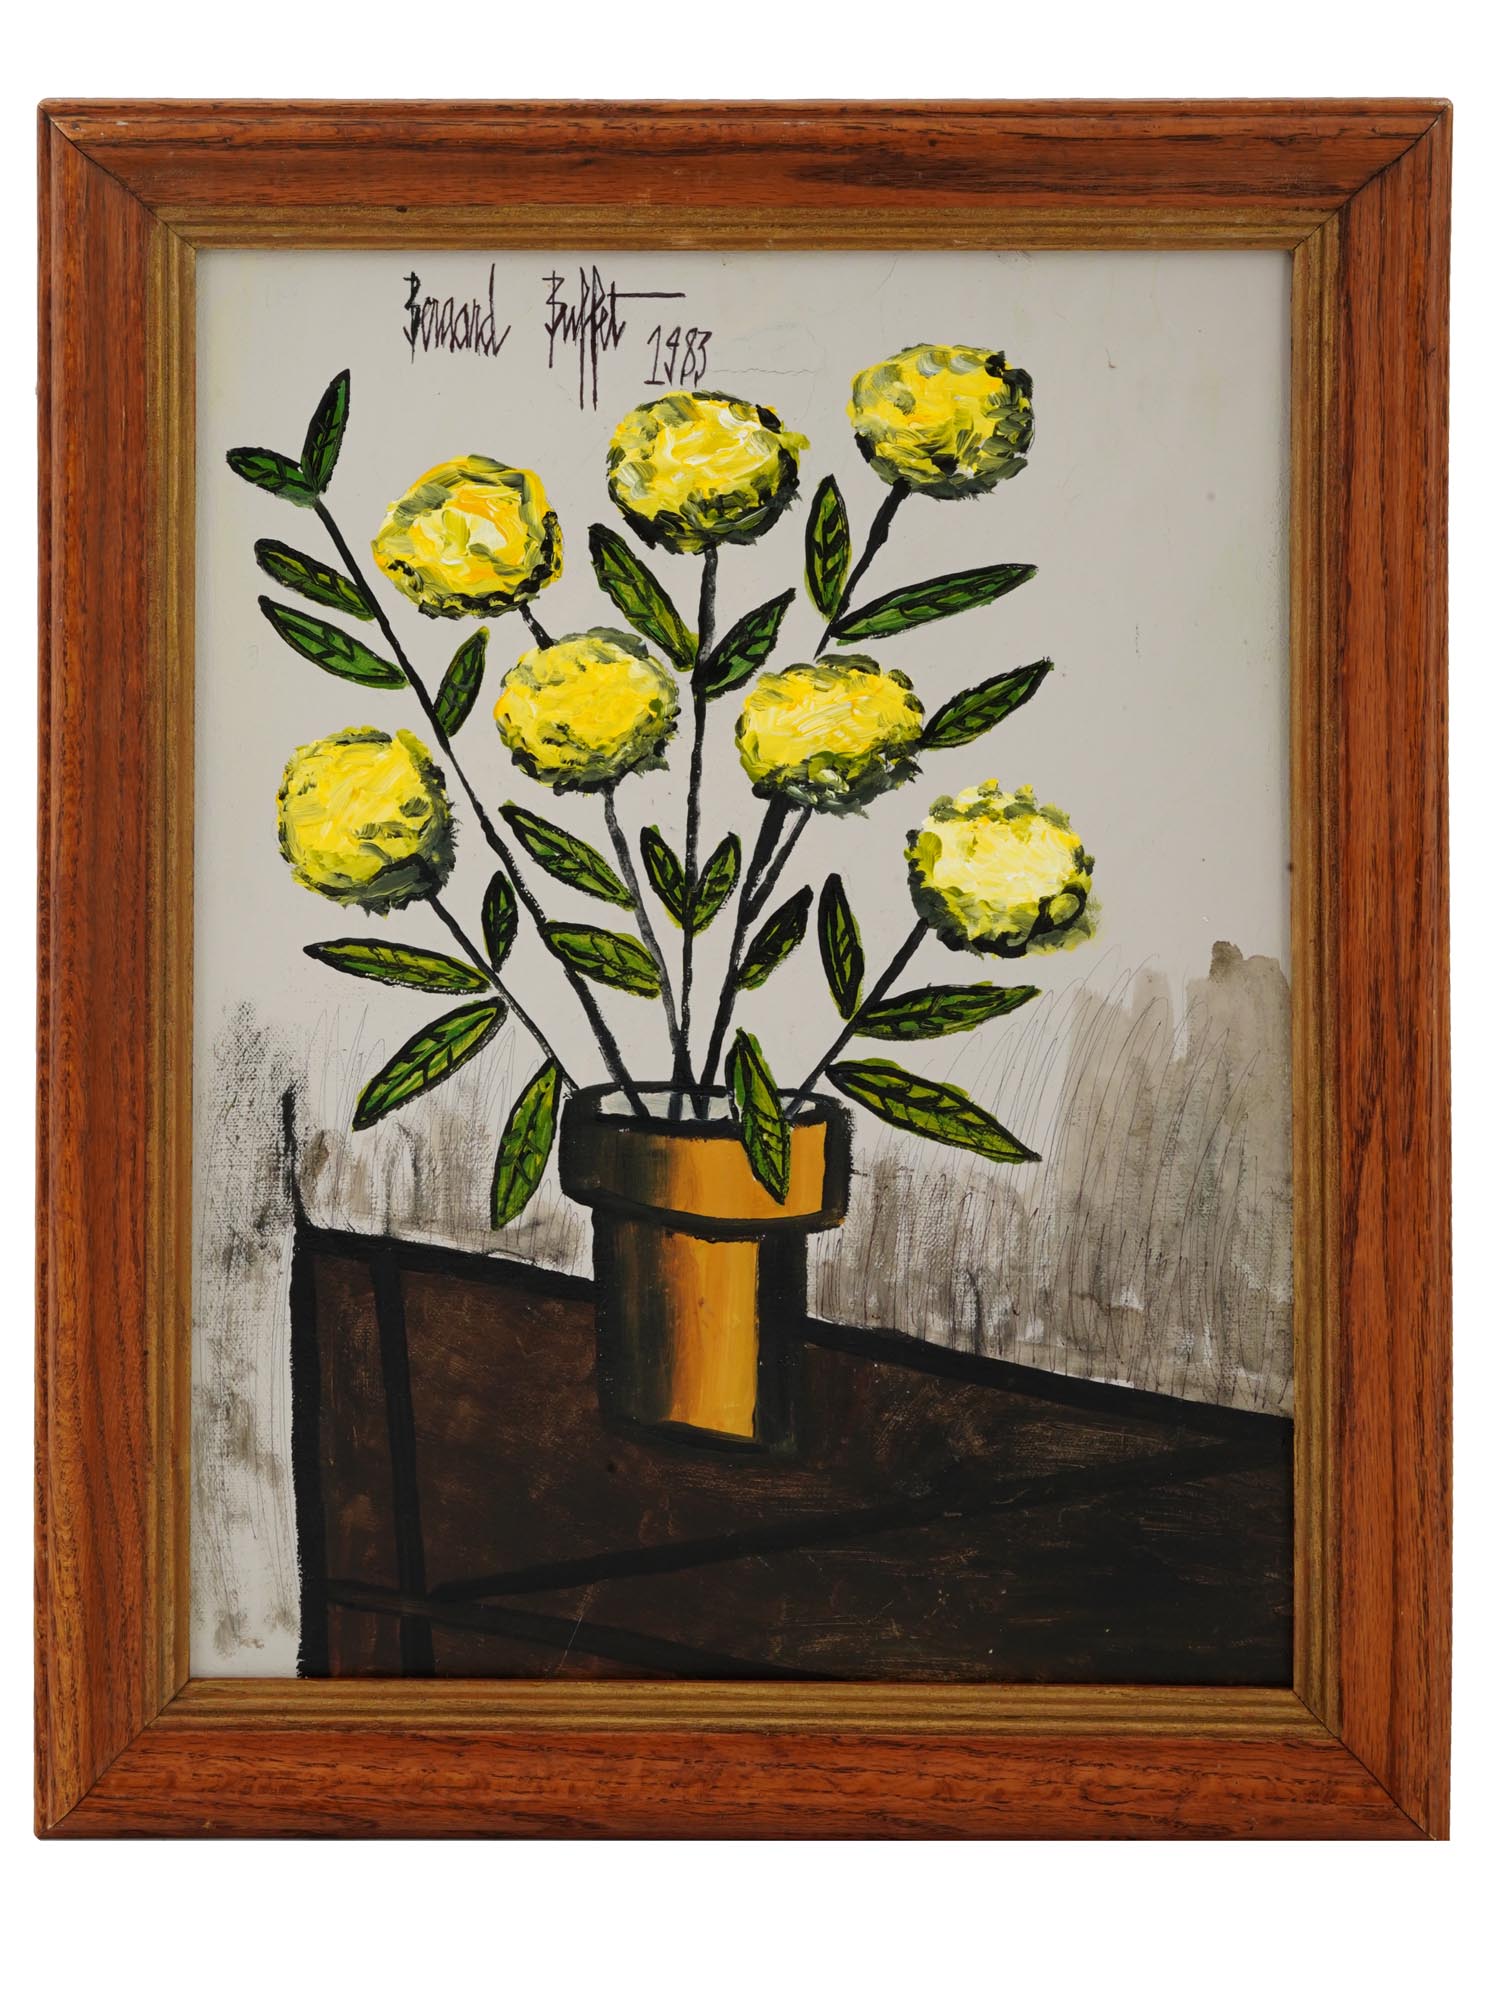 1983 FRENCH STILL LIFE PAINTING ATTR TO BERNARD BUFFET PIC-0